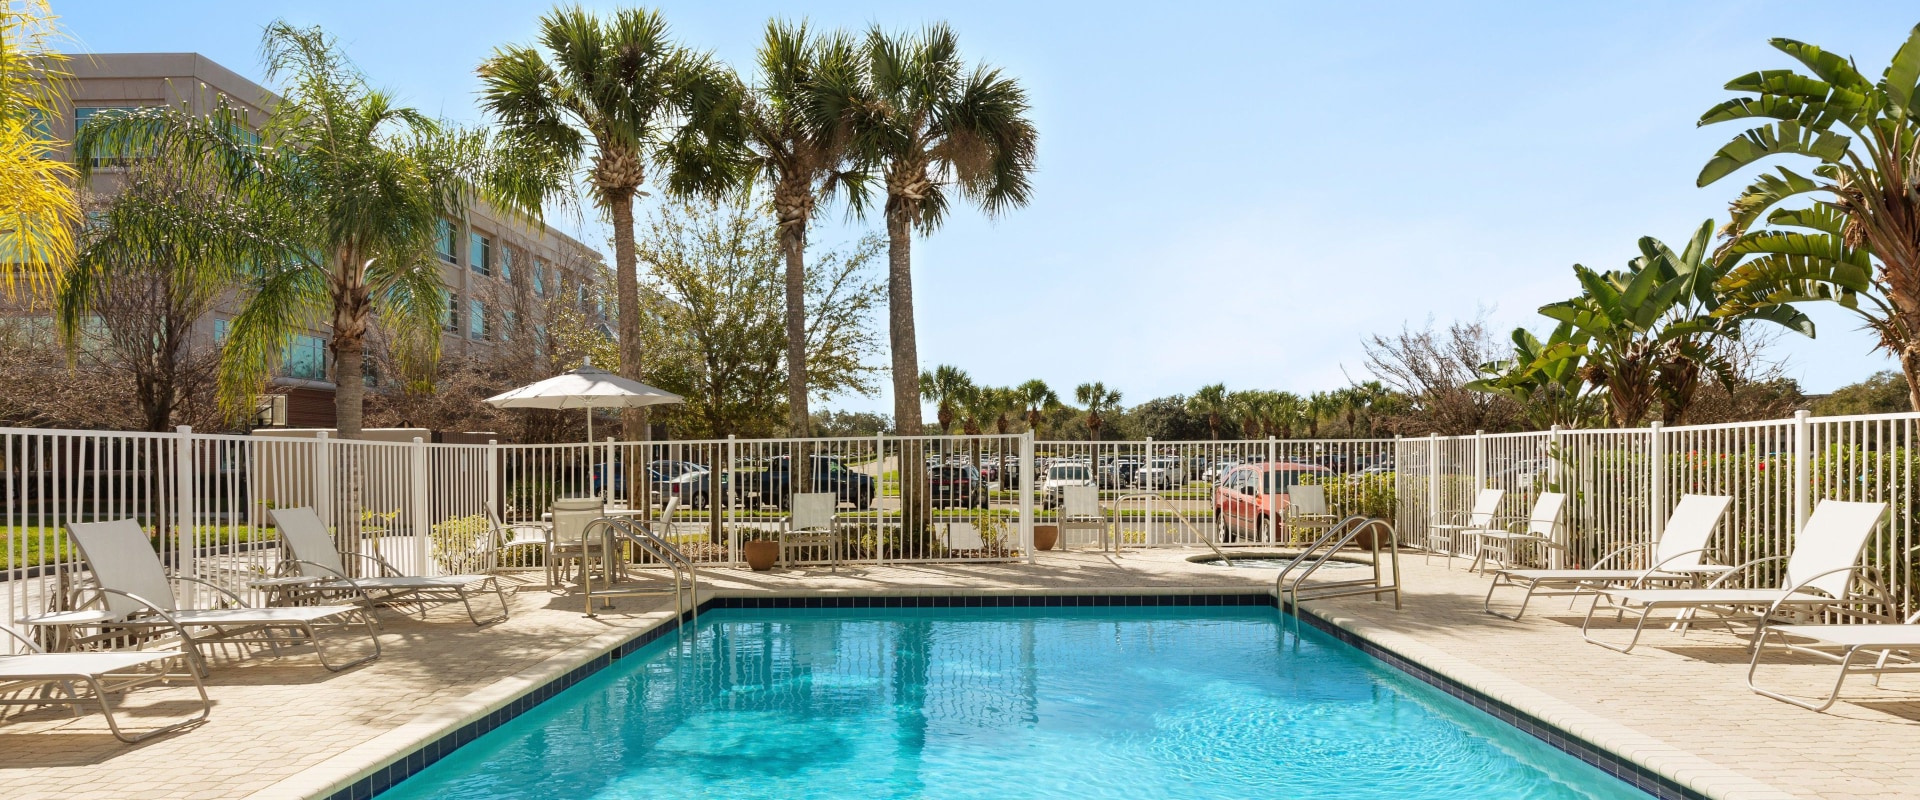 The Best Budget-Friendly Hotels in Tampa, Florida